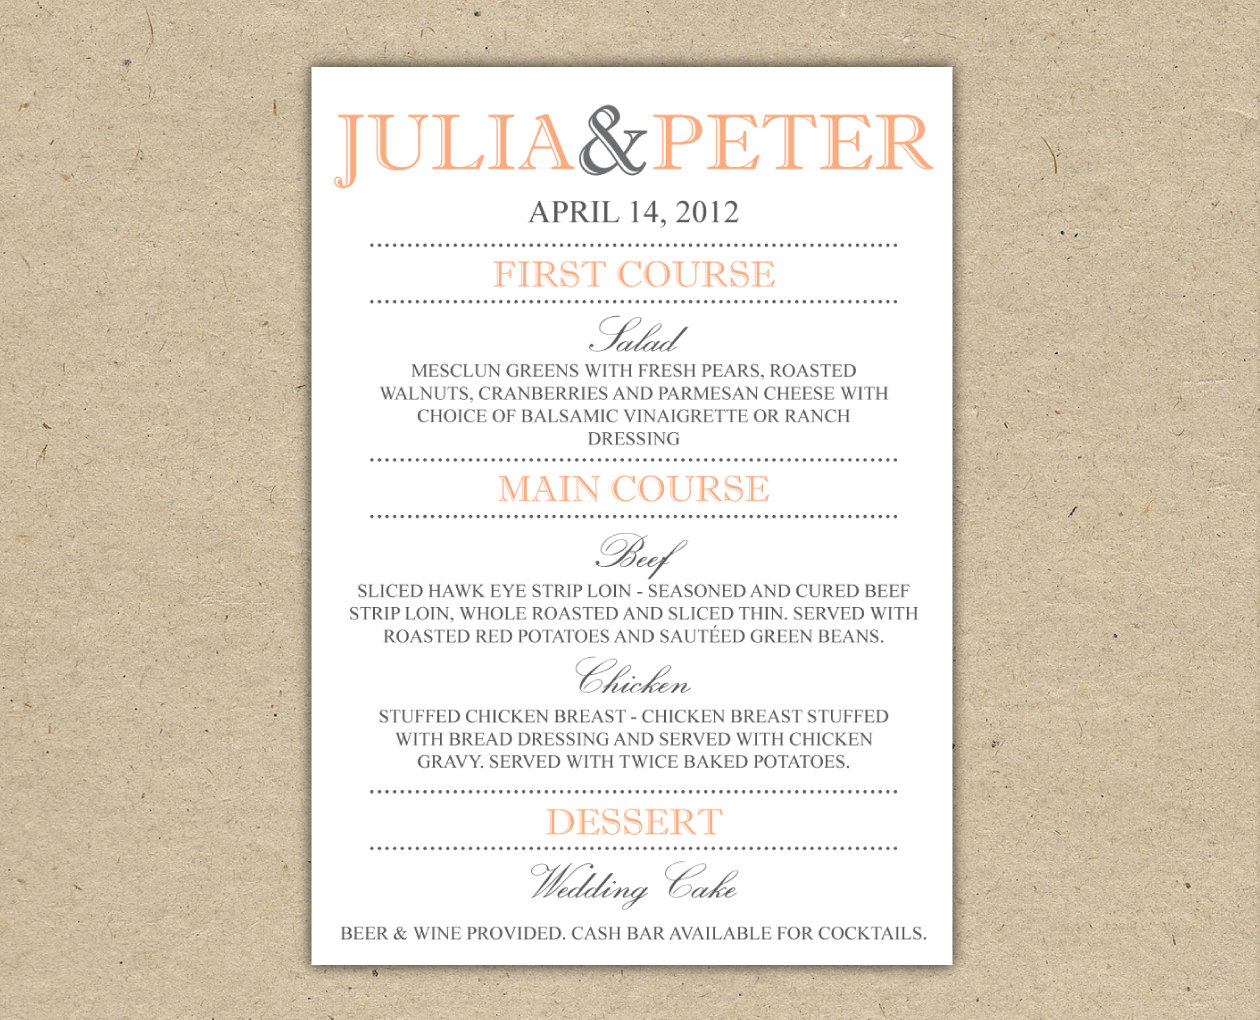 22 Dinner Menu Templates Free Images - Printable Weekly Dinner Intended For Wedding Menu Templates Free Download